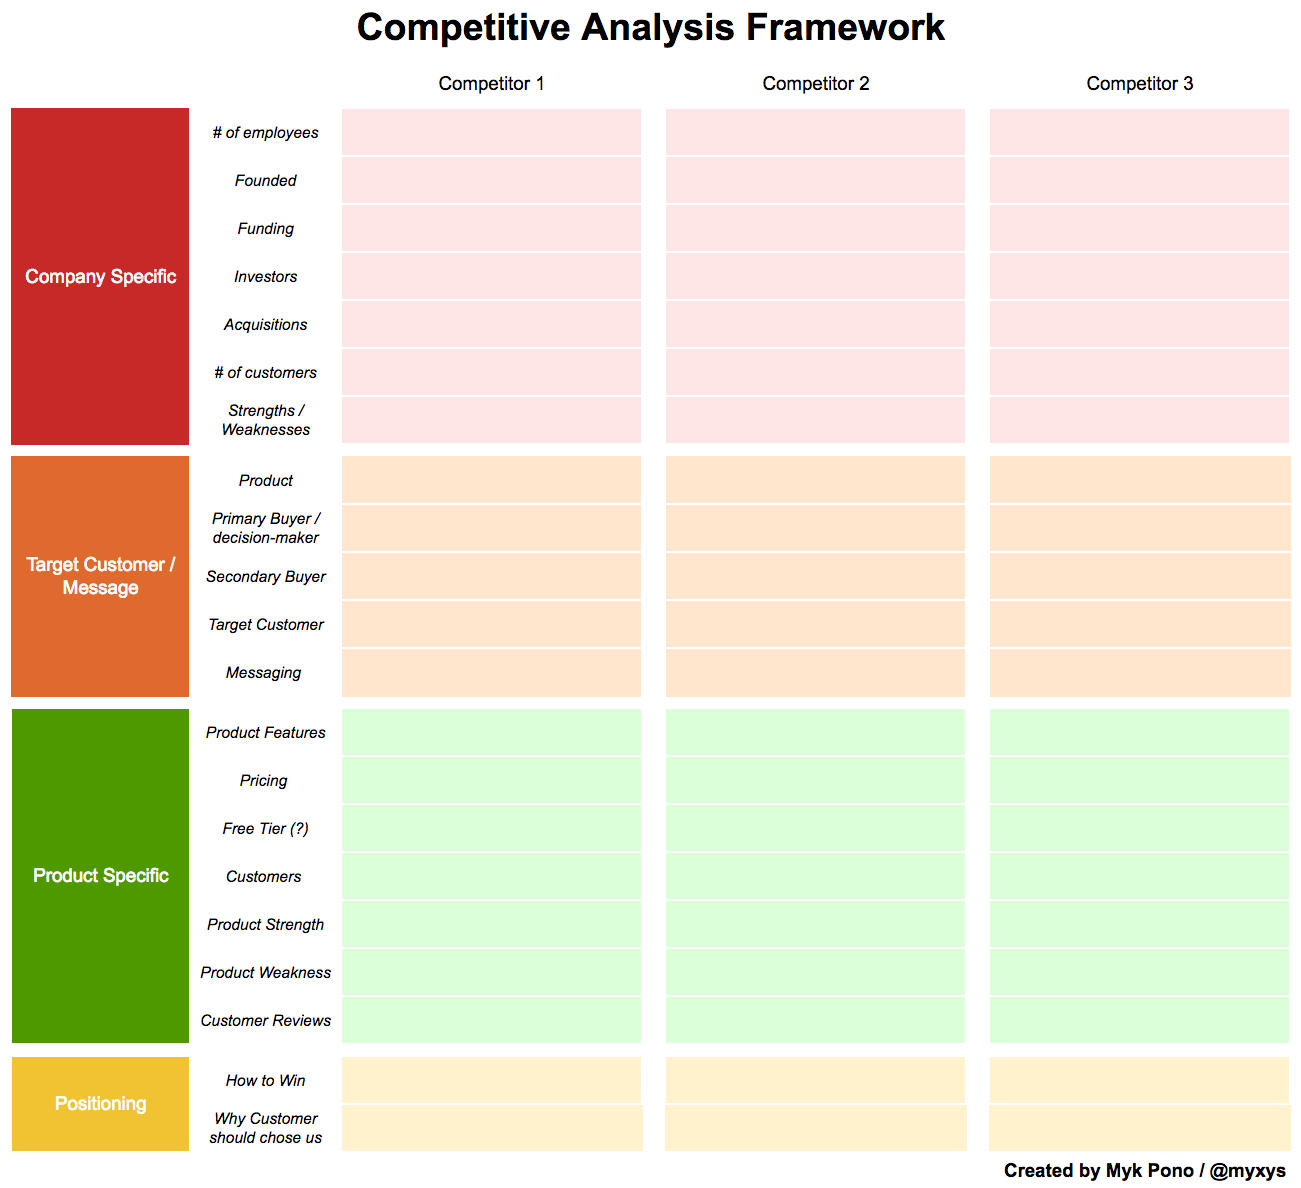 10 steps to conduct a competitive analysis